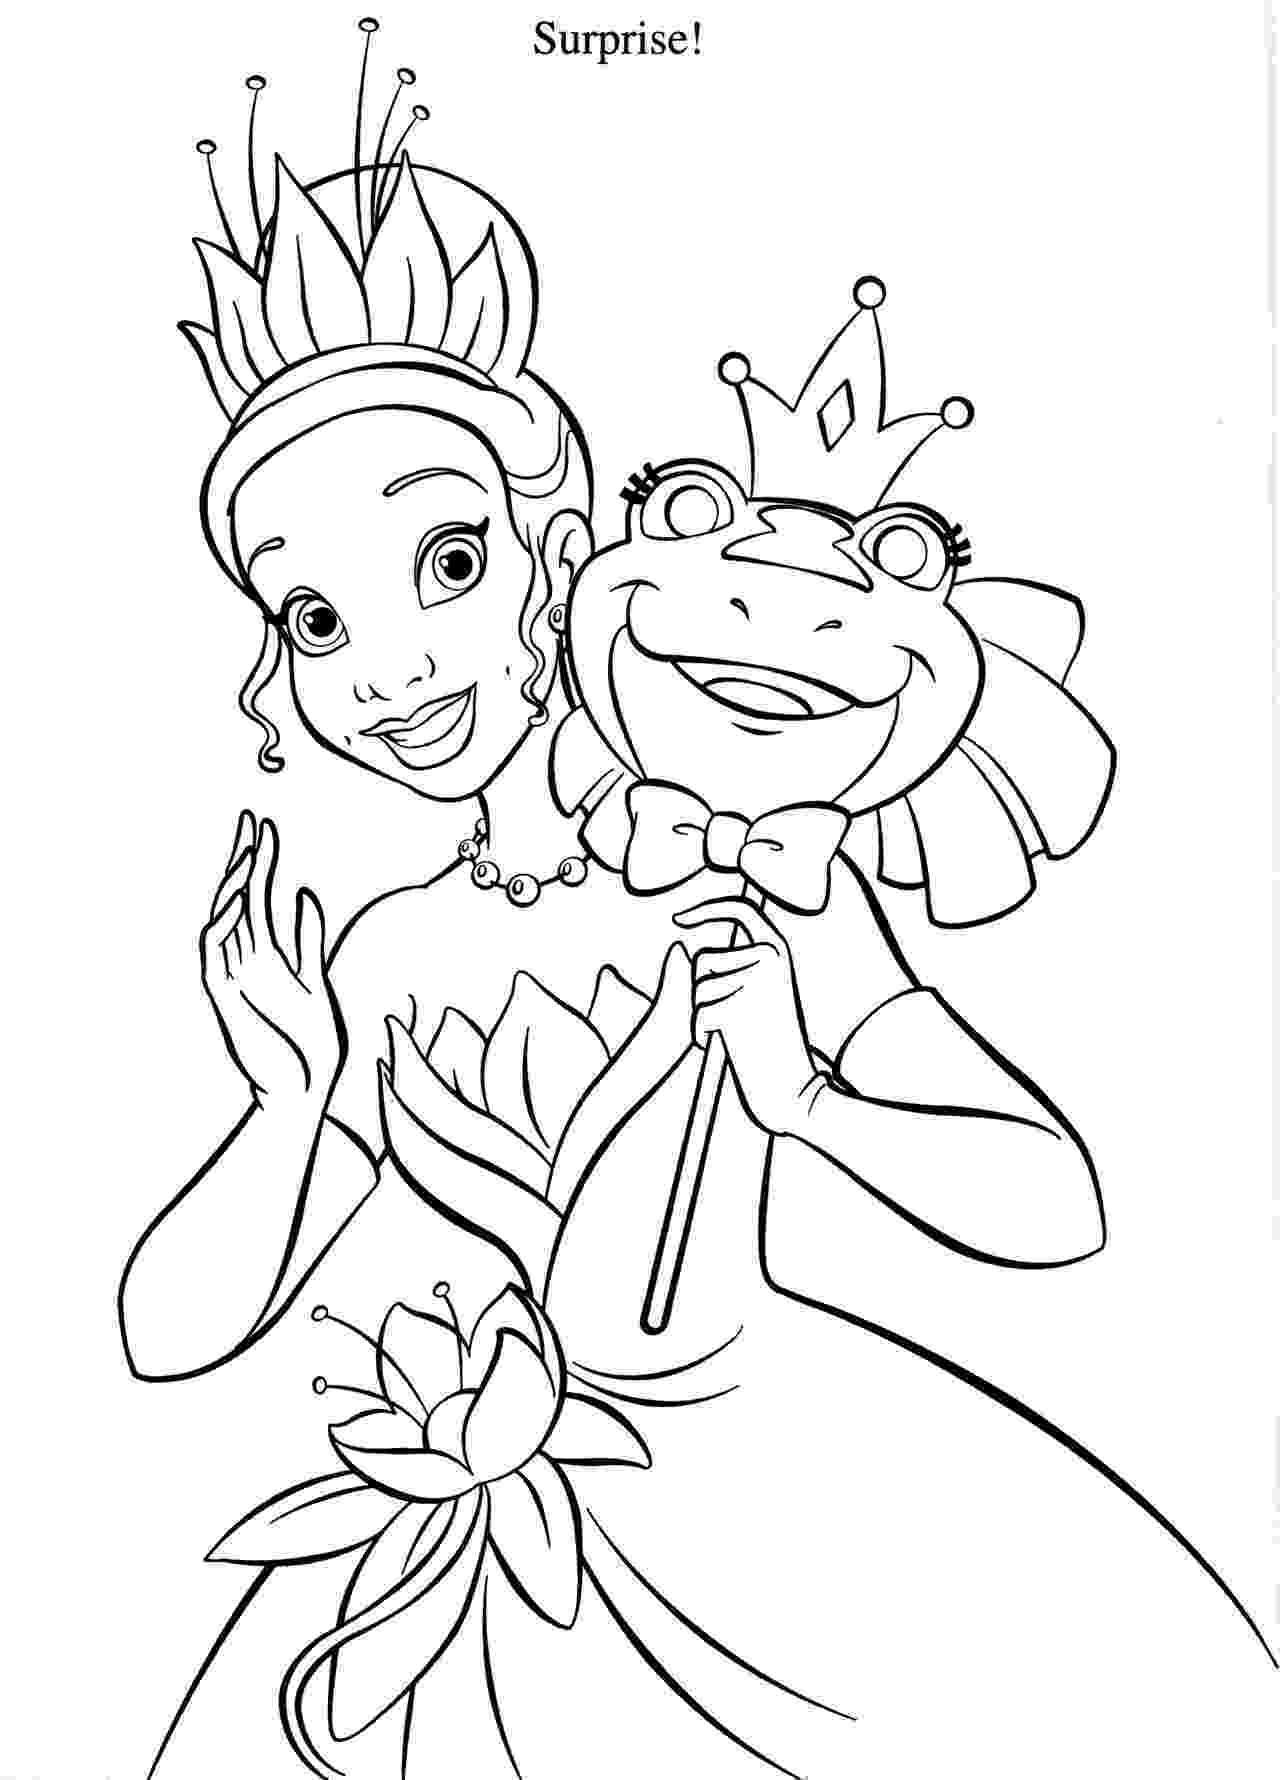 coloring paghes duckling coloring pages to download and print for free coloring paghes 